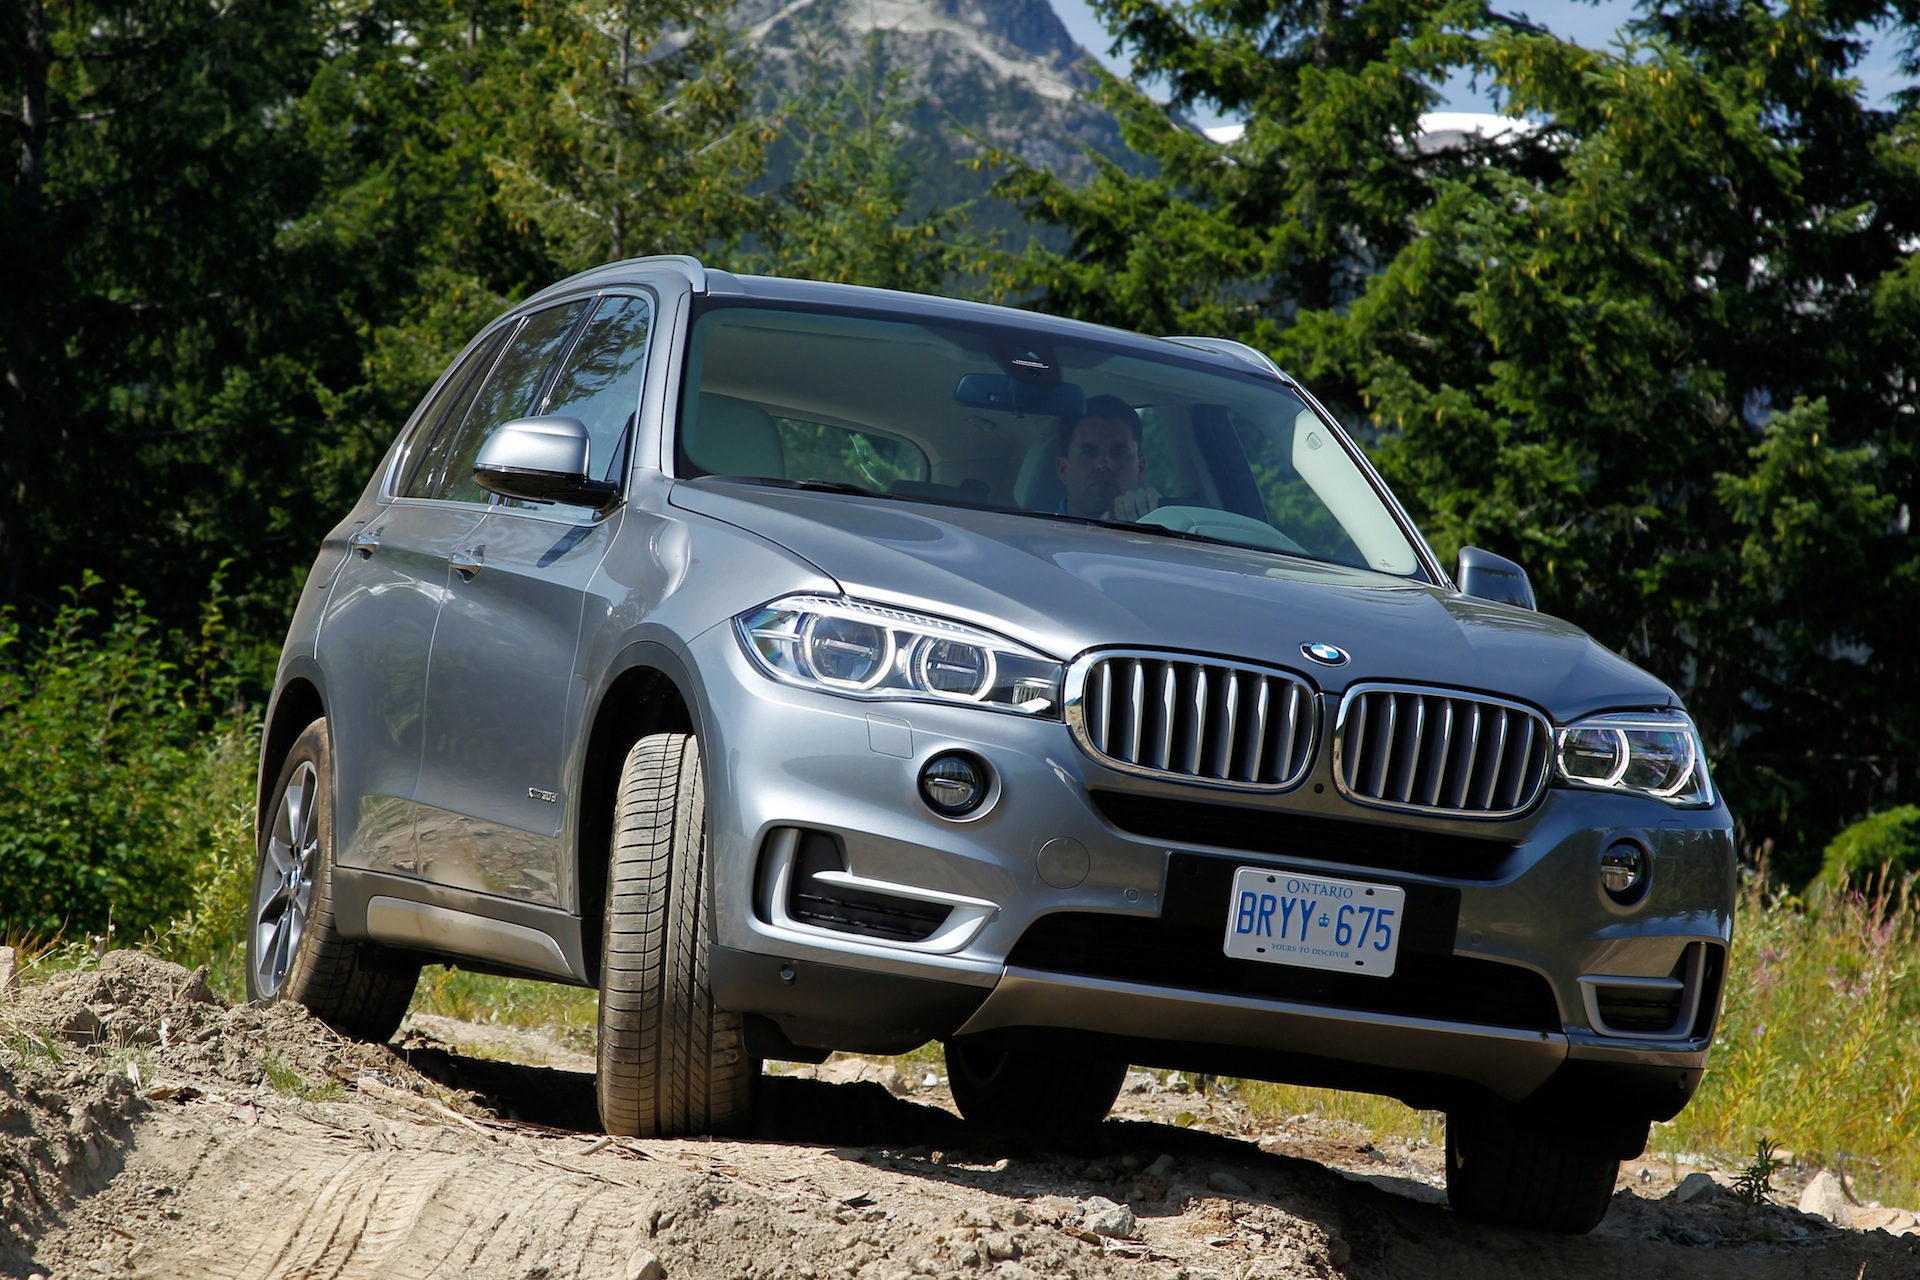 Temple Painkiller gap 2014 BMW X5 Review, Ratings, Specs, Prices, and Photos - The Car Connection